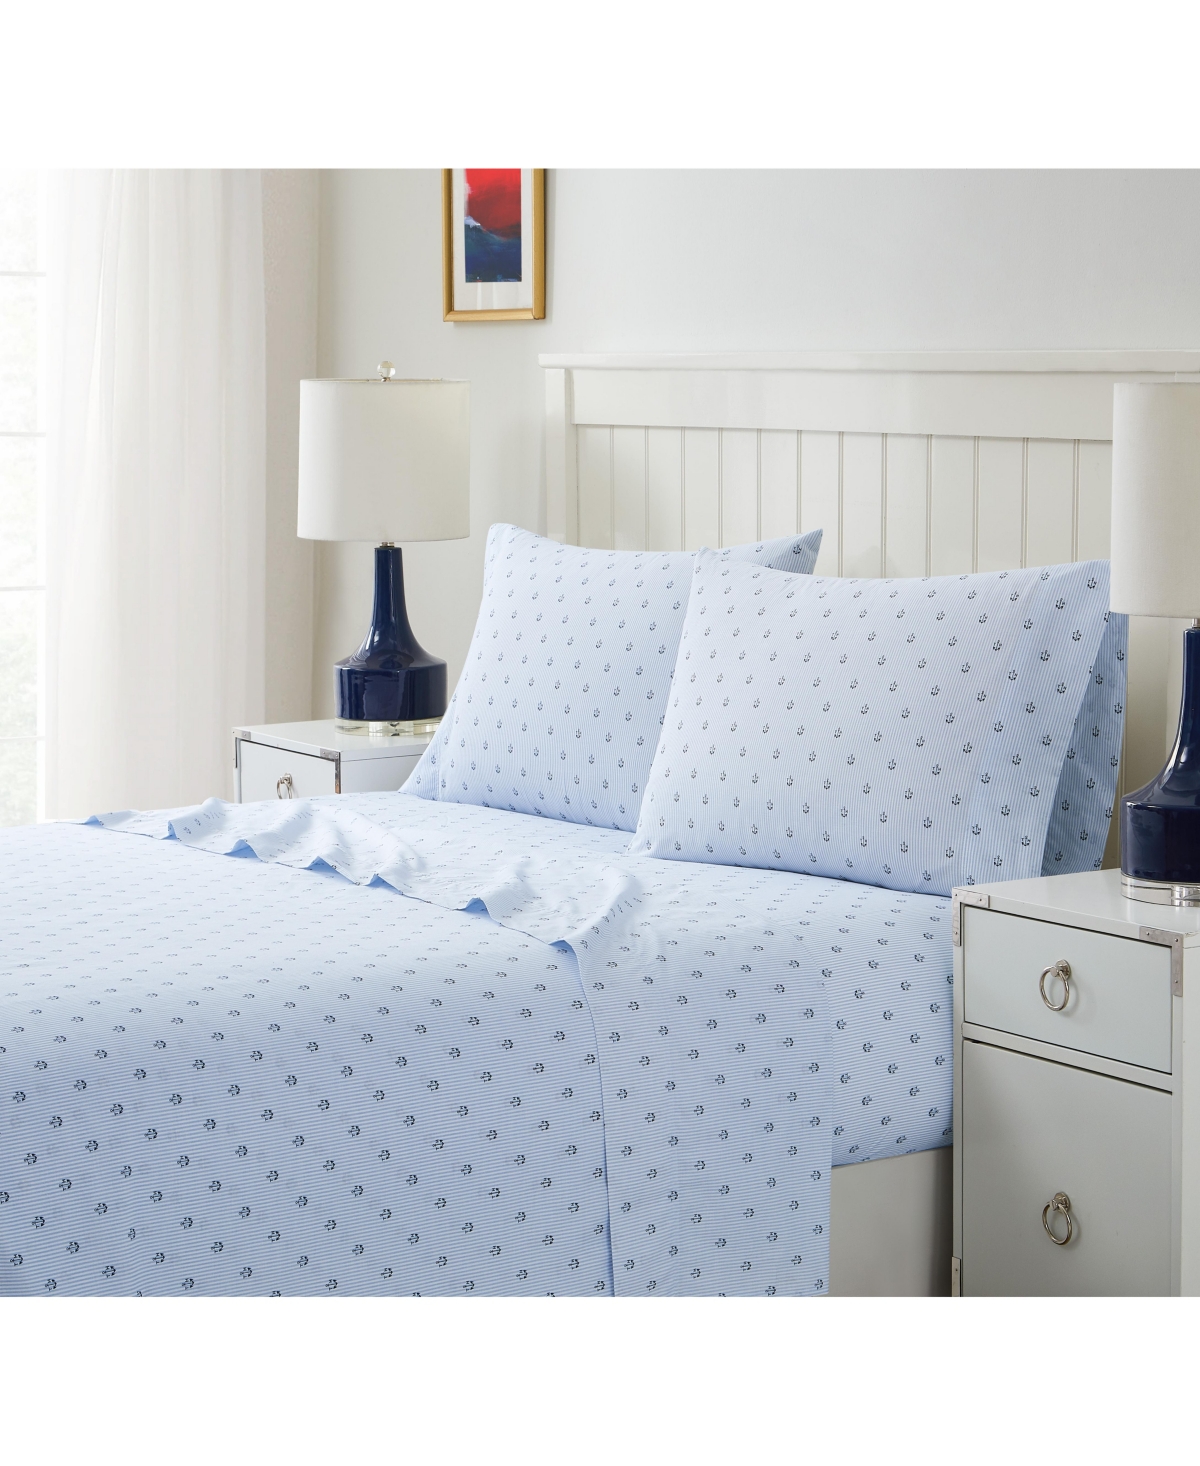 Tommy Hilfiger Ithaca Anchors Cotton 4 Piece Sheet Set, Queen In Blue